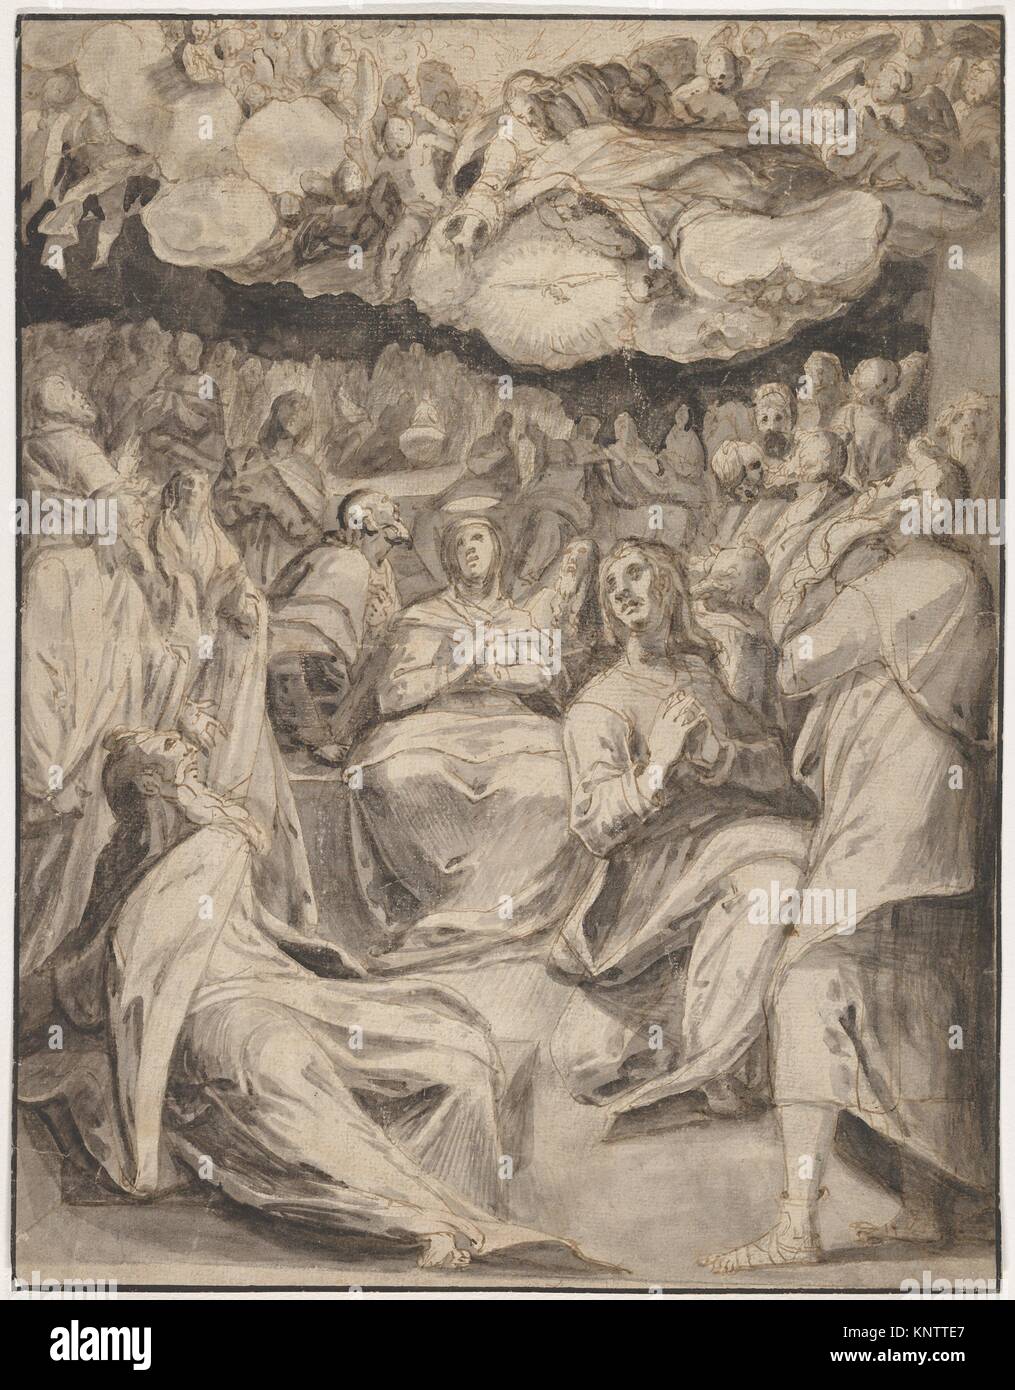 The Pentecost. Artist: Master of the Egmont Albums (Netherlandish, 16th century); Date: 16th century; Medium: Pen and brown ink, brush and gray and Stock Photo